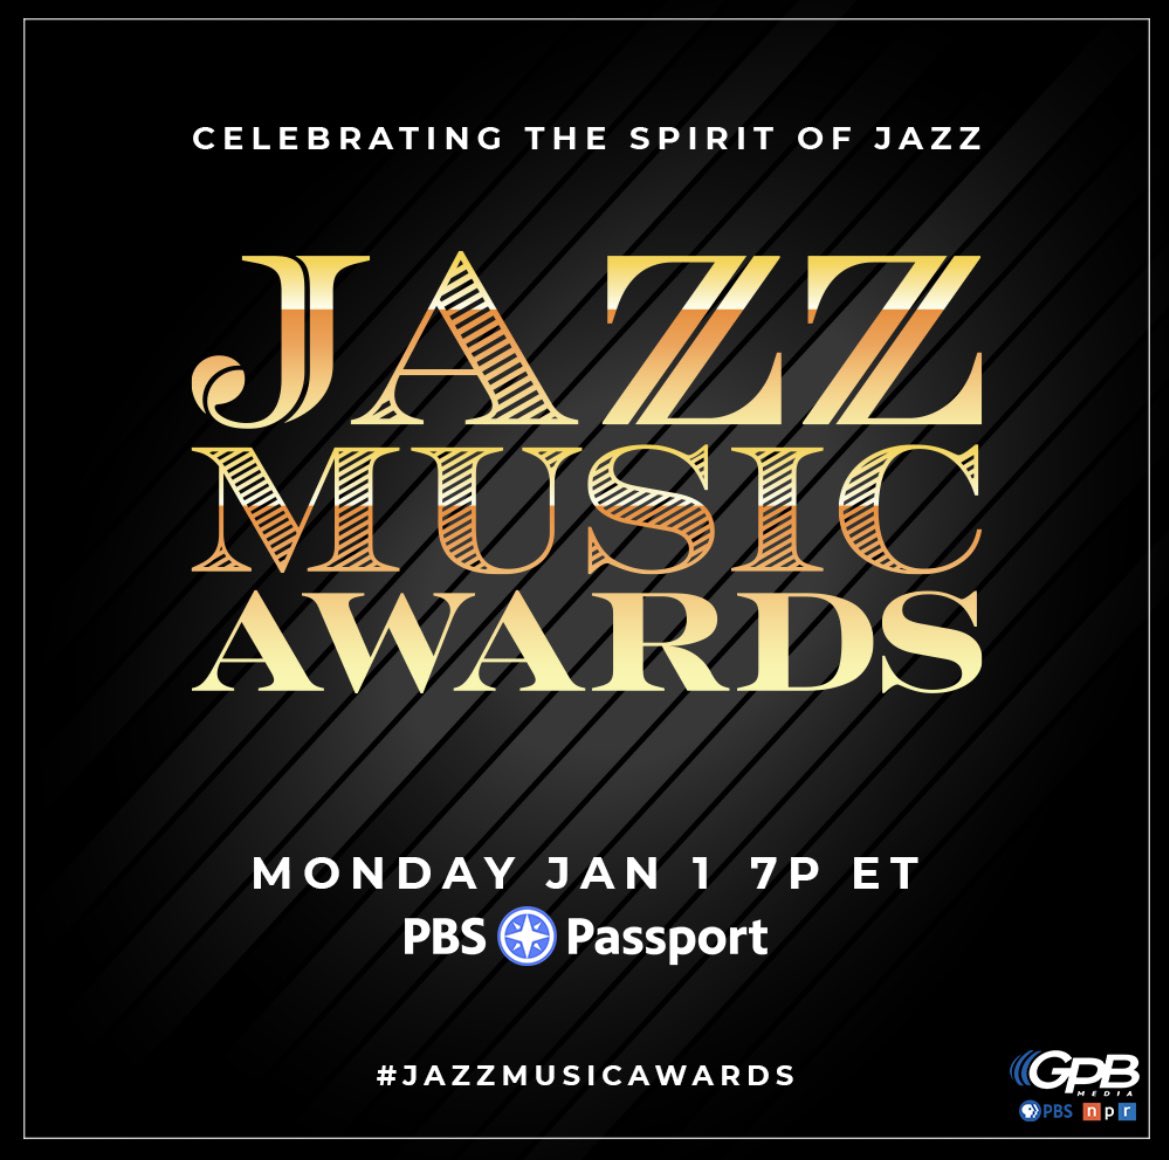 The broadcast premiere of the #JazzMusicAwards is tomorrow 1/1/24 at 7pm on #GPB and live streaming at GPB.org and for #PBSPassport Members it will be On Demand beginning at 7pm. #JazzIsTheCulture